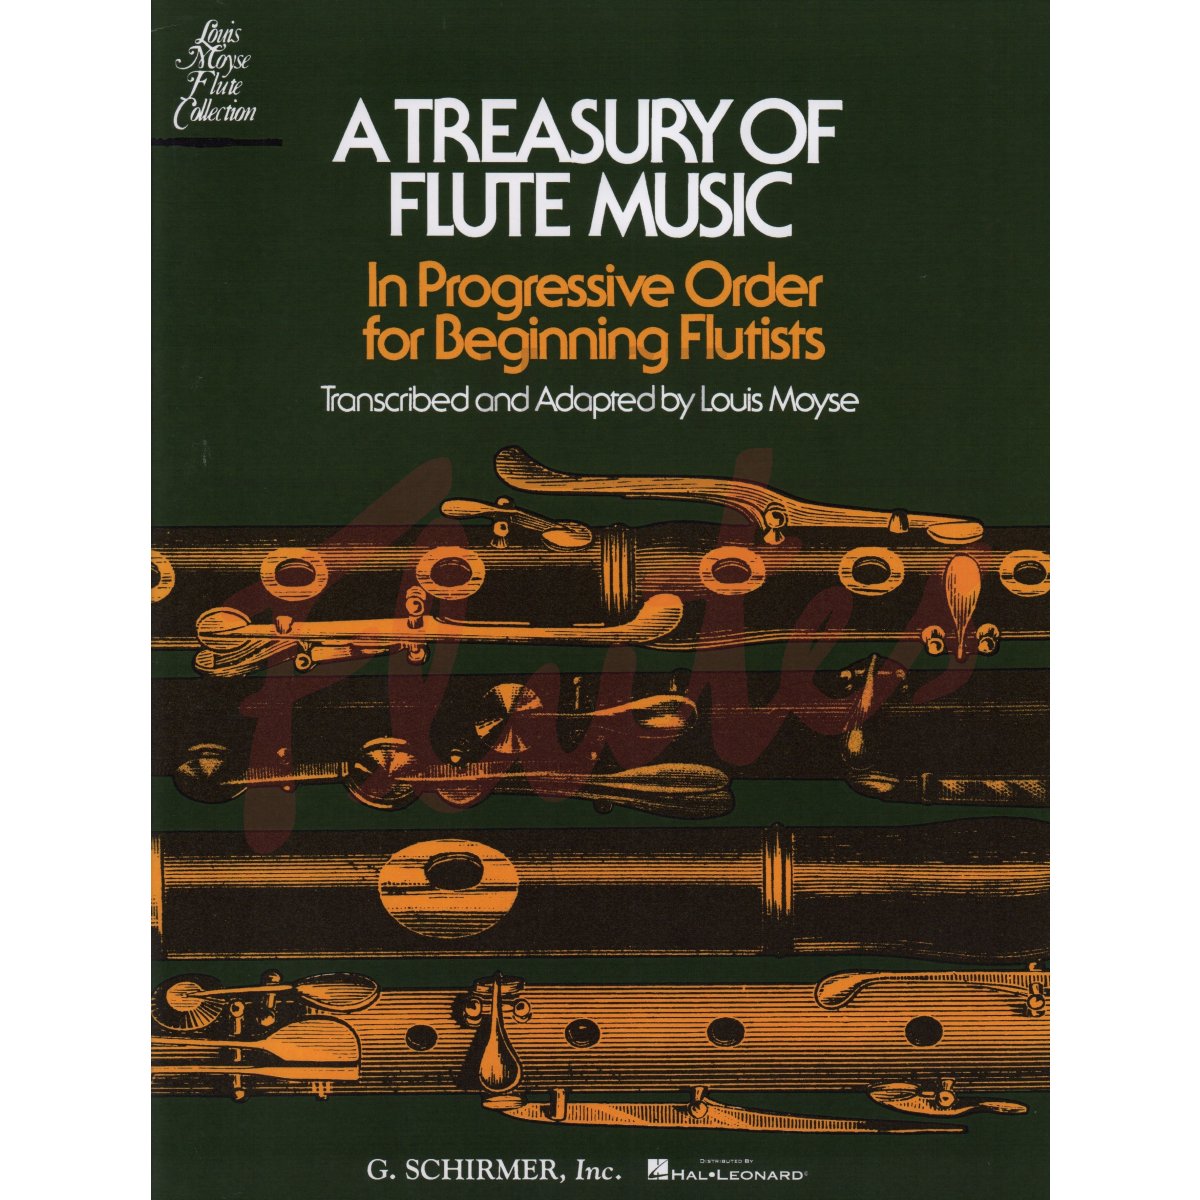 A Treasury of Flute Music for Flute and Piano